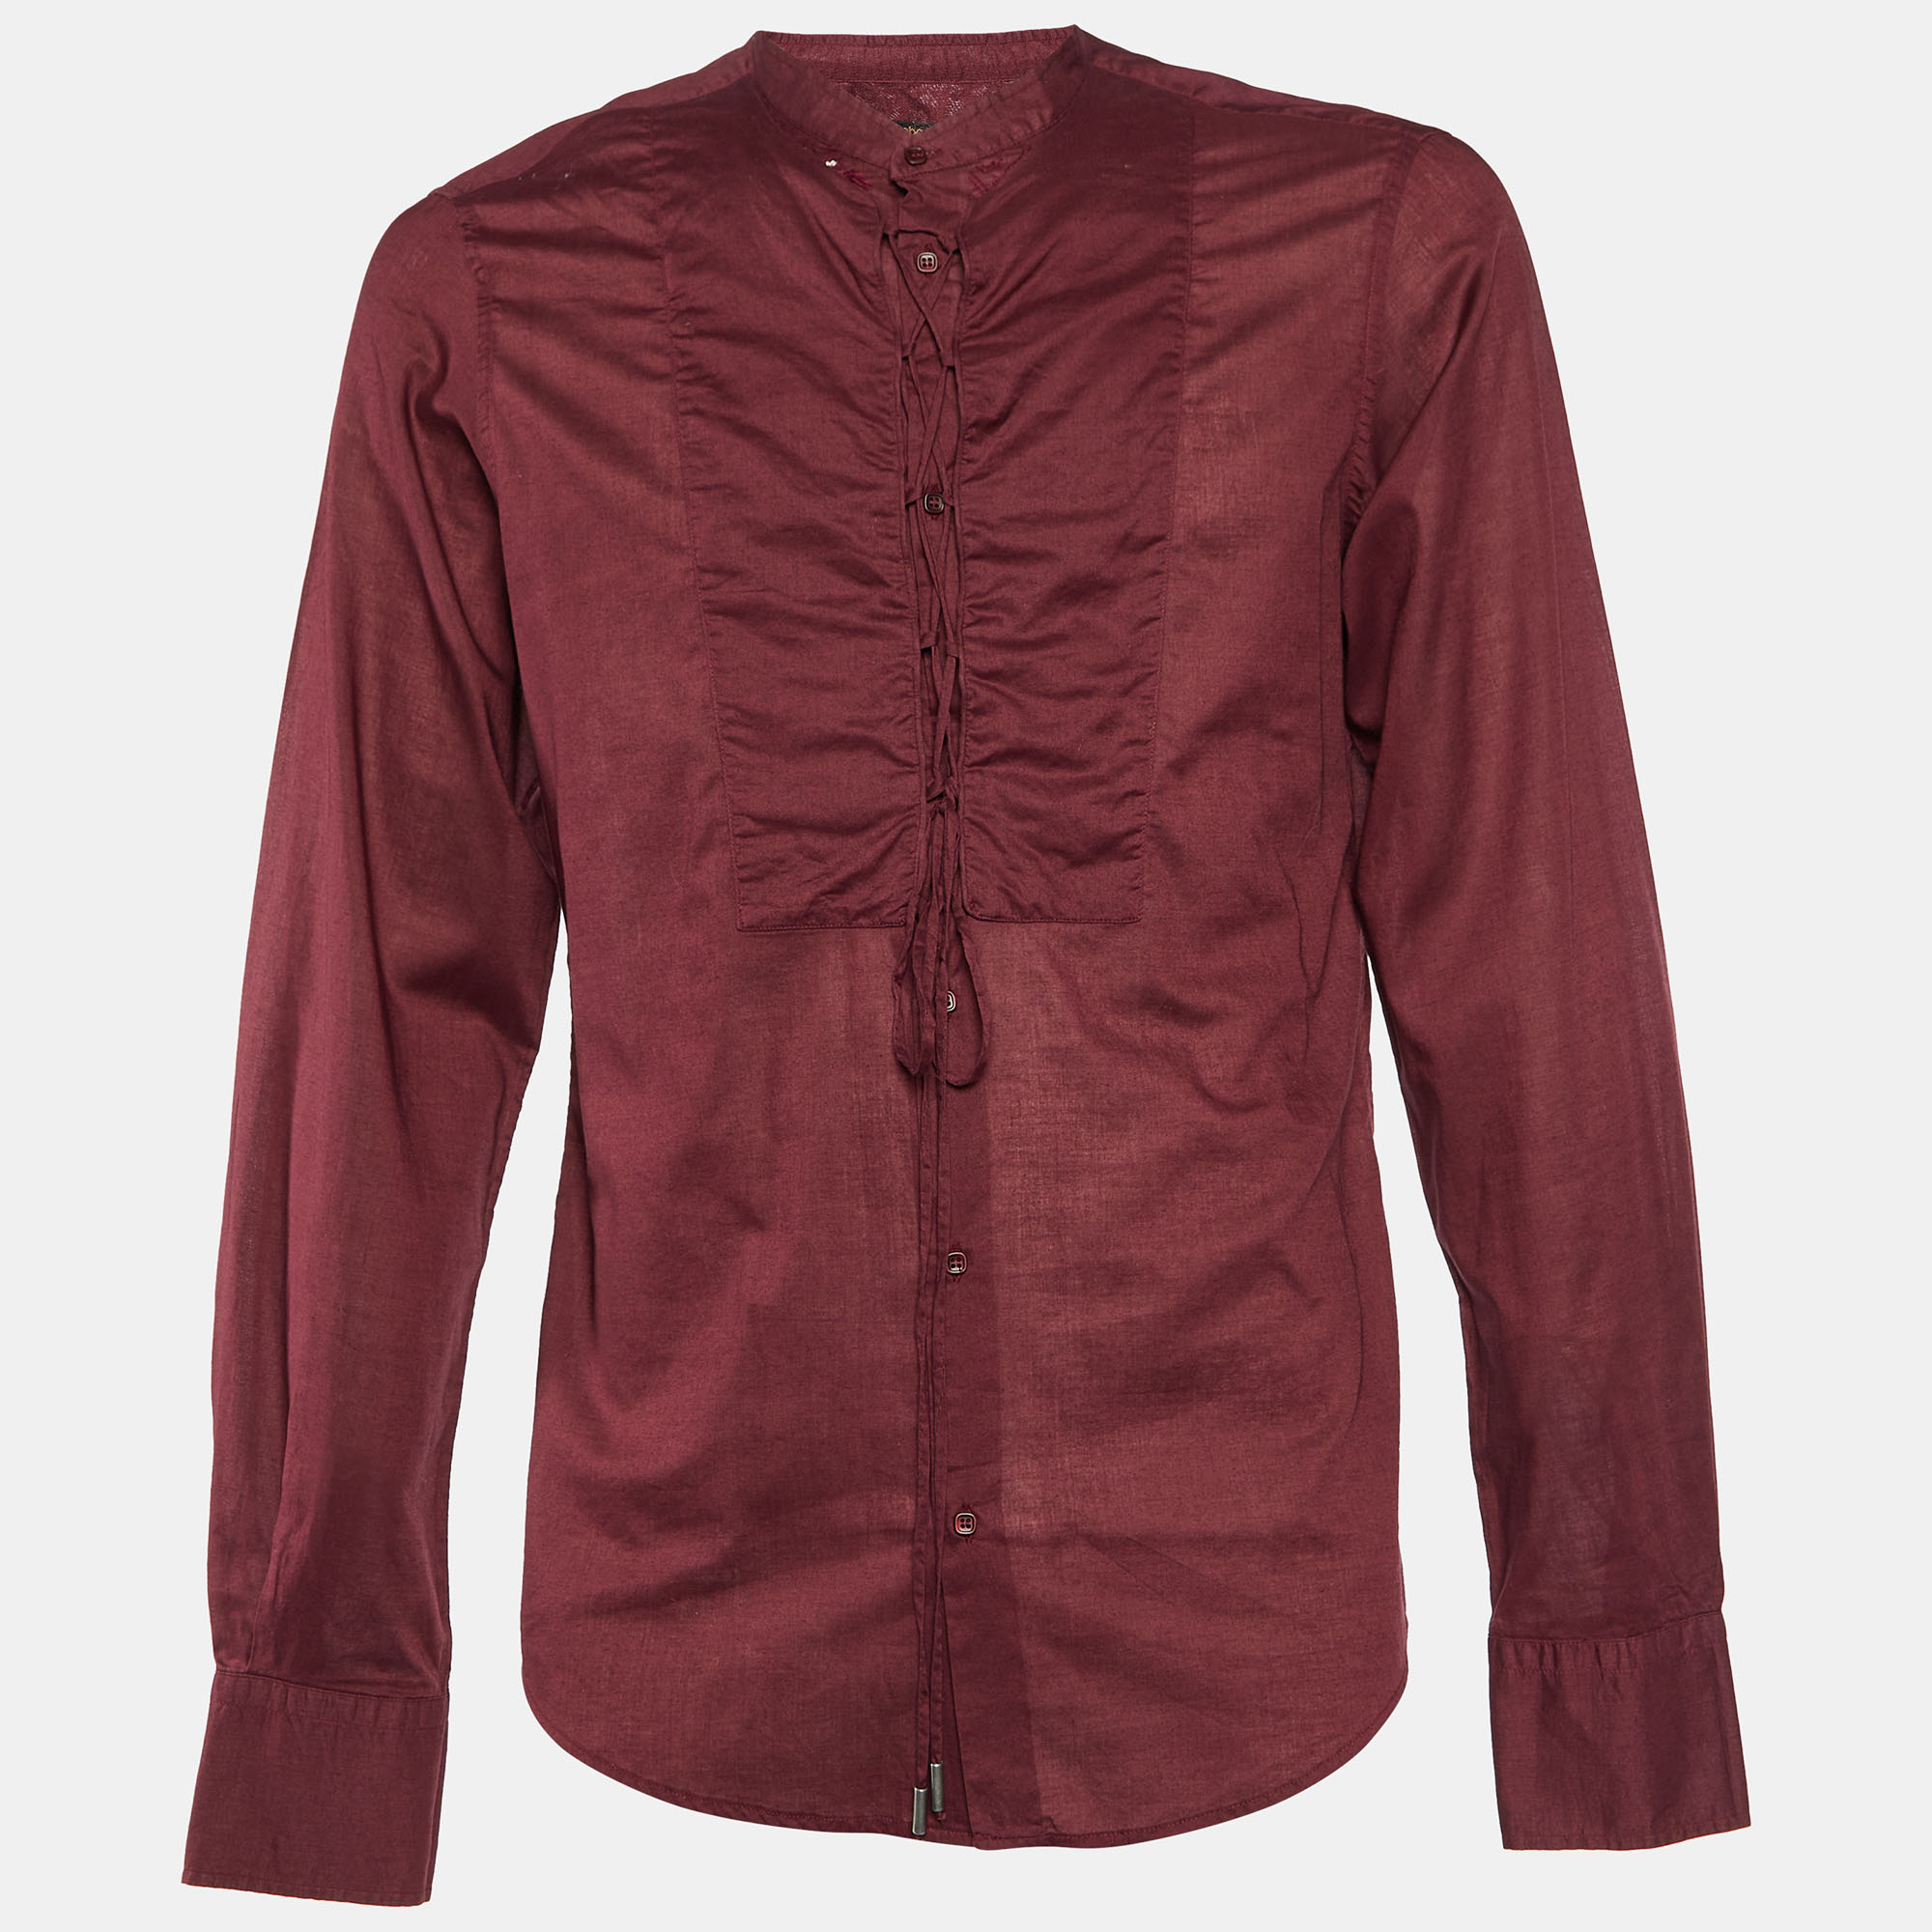 

Roberto Cavalli Burgundy Cotton Embroidered Lace Up Detail Shirt